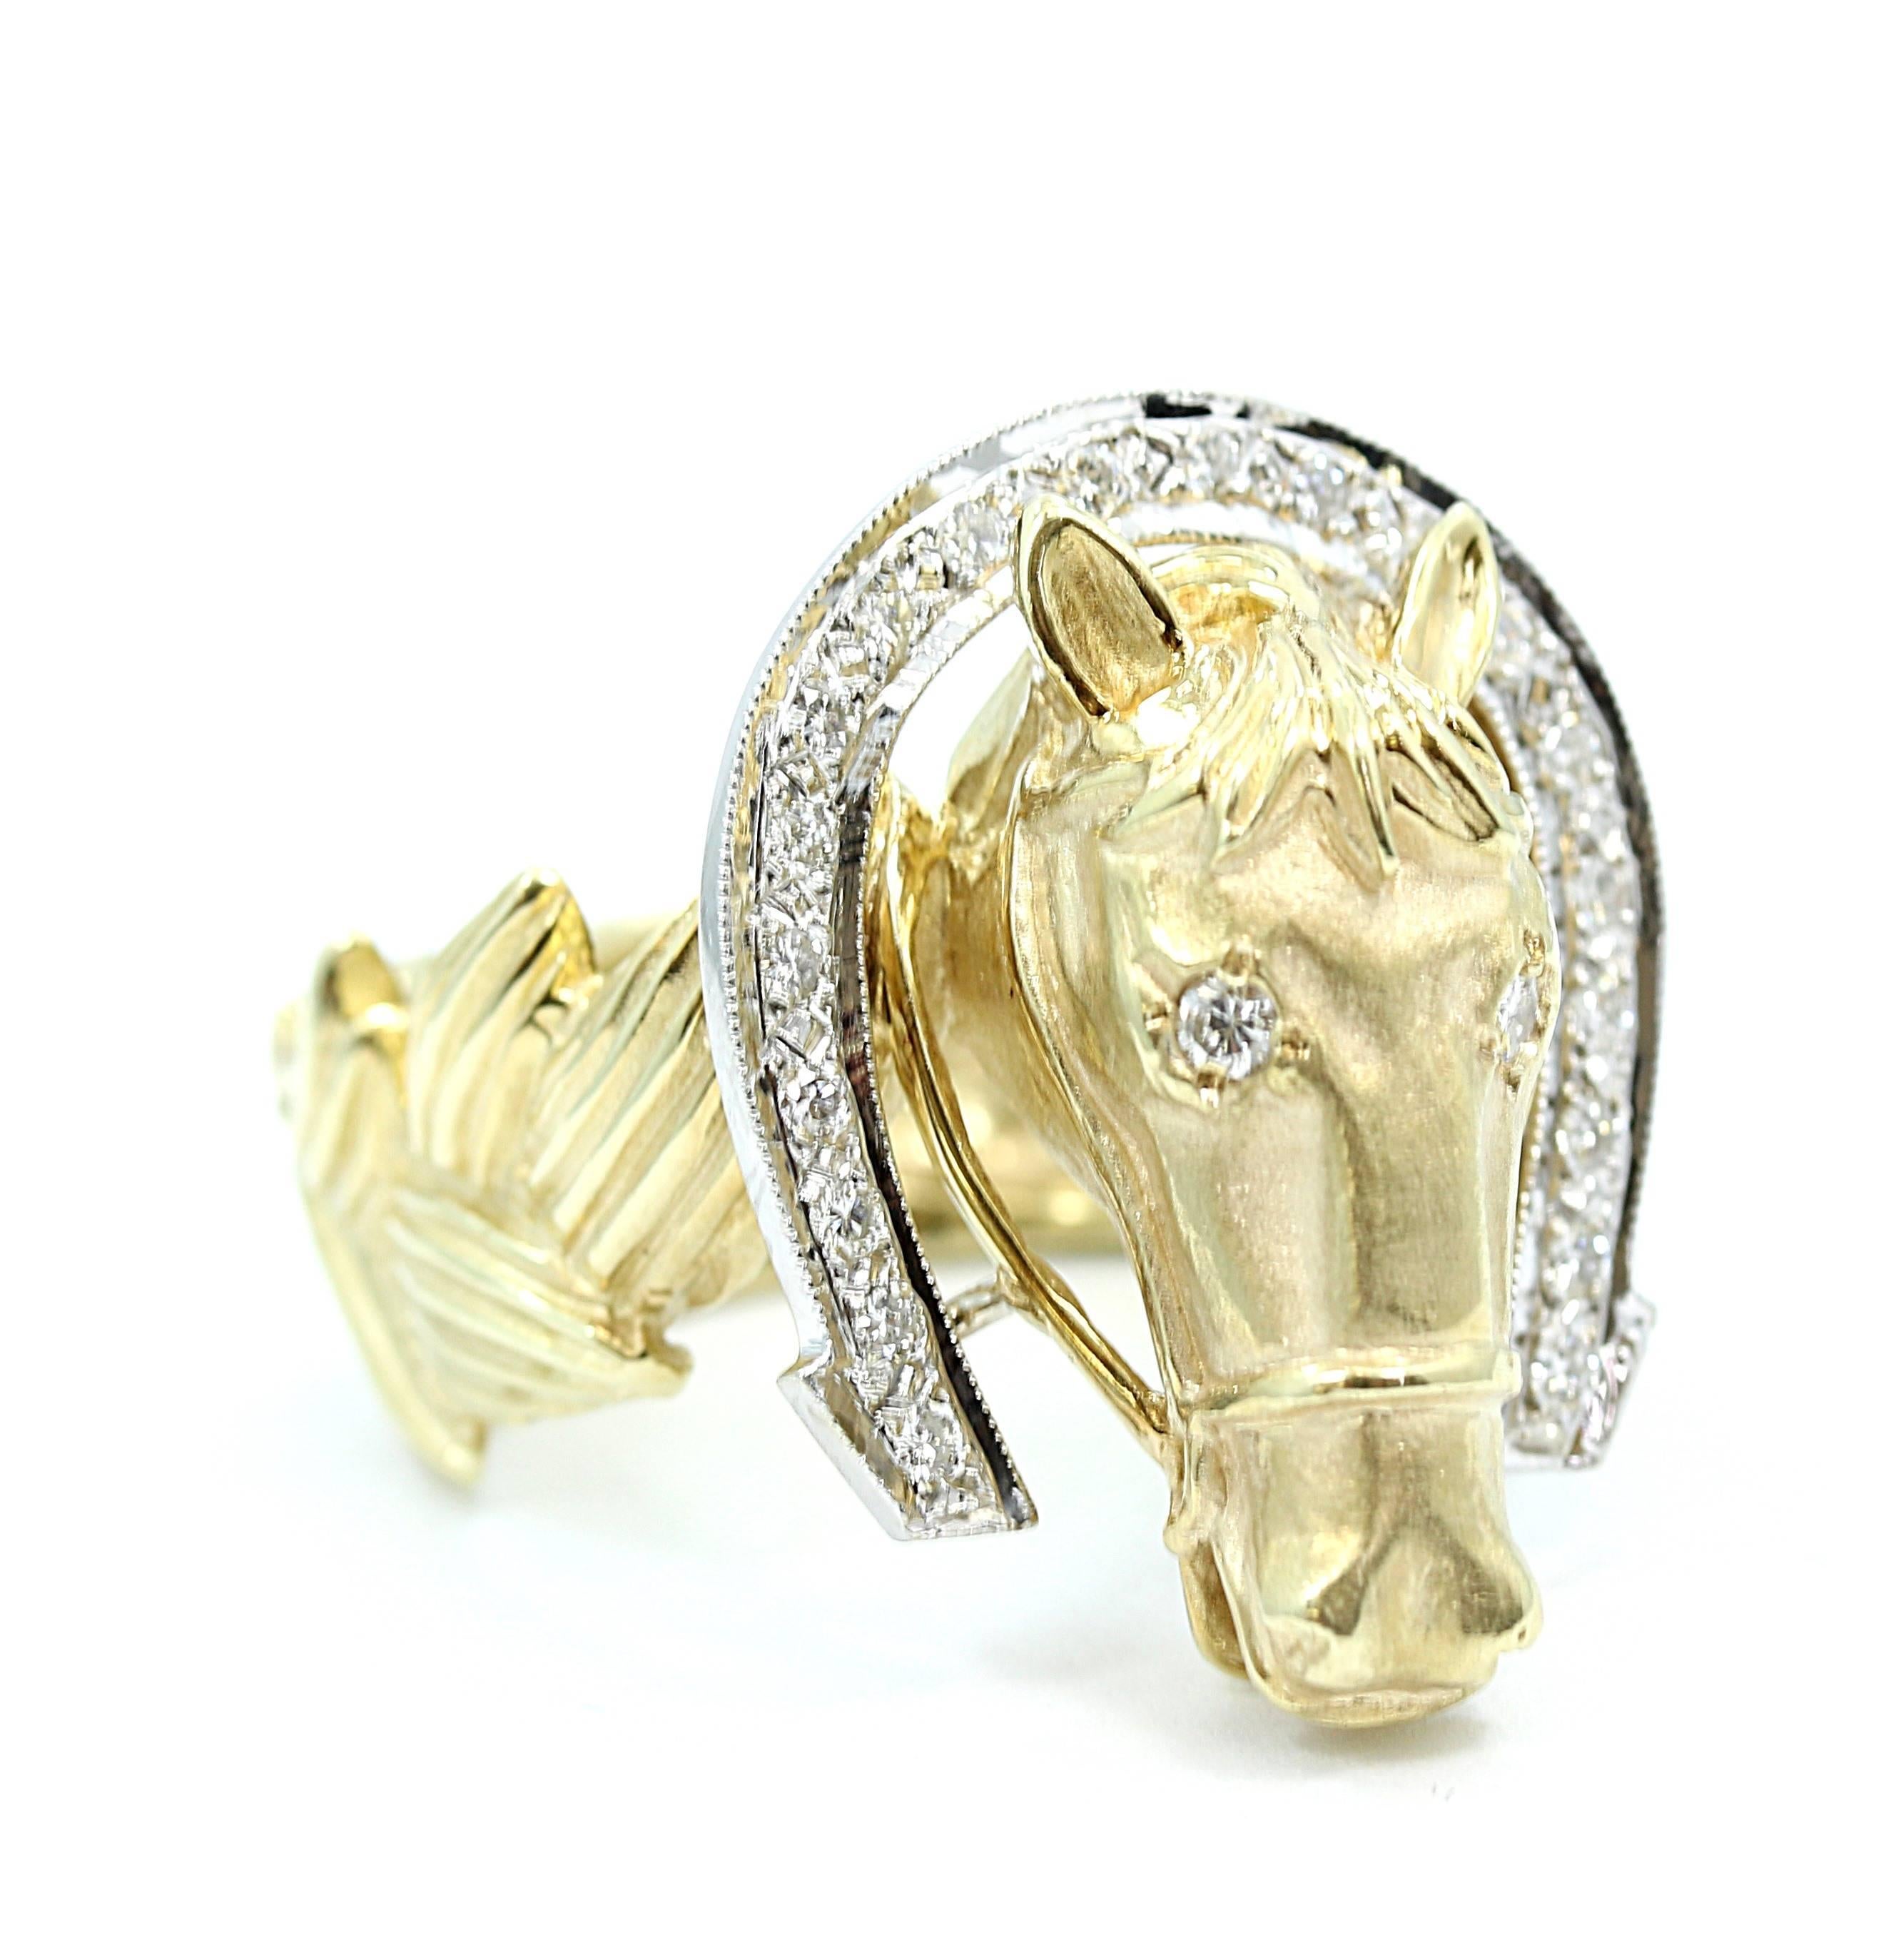 We have this 14k yellow gold horse and horseshoe ring. It has twenty (20) diamonds H-I, VS-SI that weigh .30 carats total weight. The ring sits at a size 10 and can be easily adjusted. It weighs a total of 22.7 grams. The ring is in great condition.